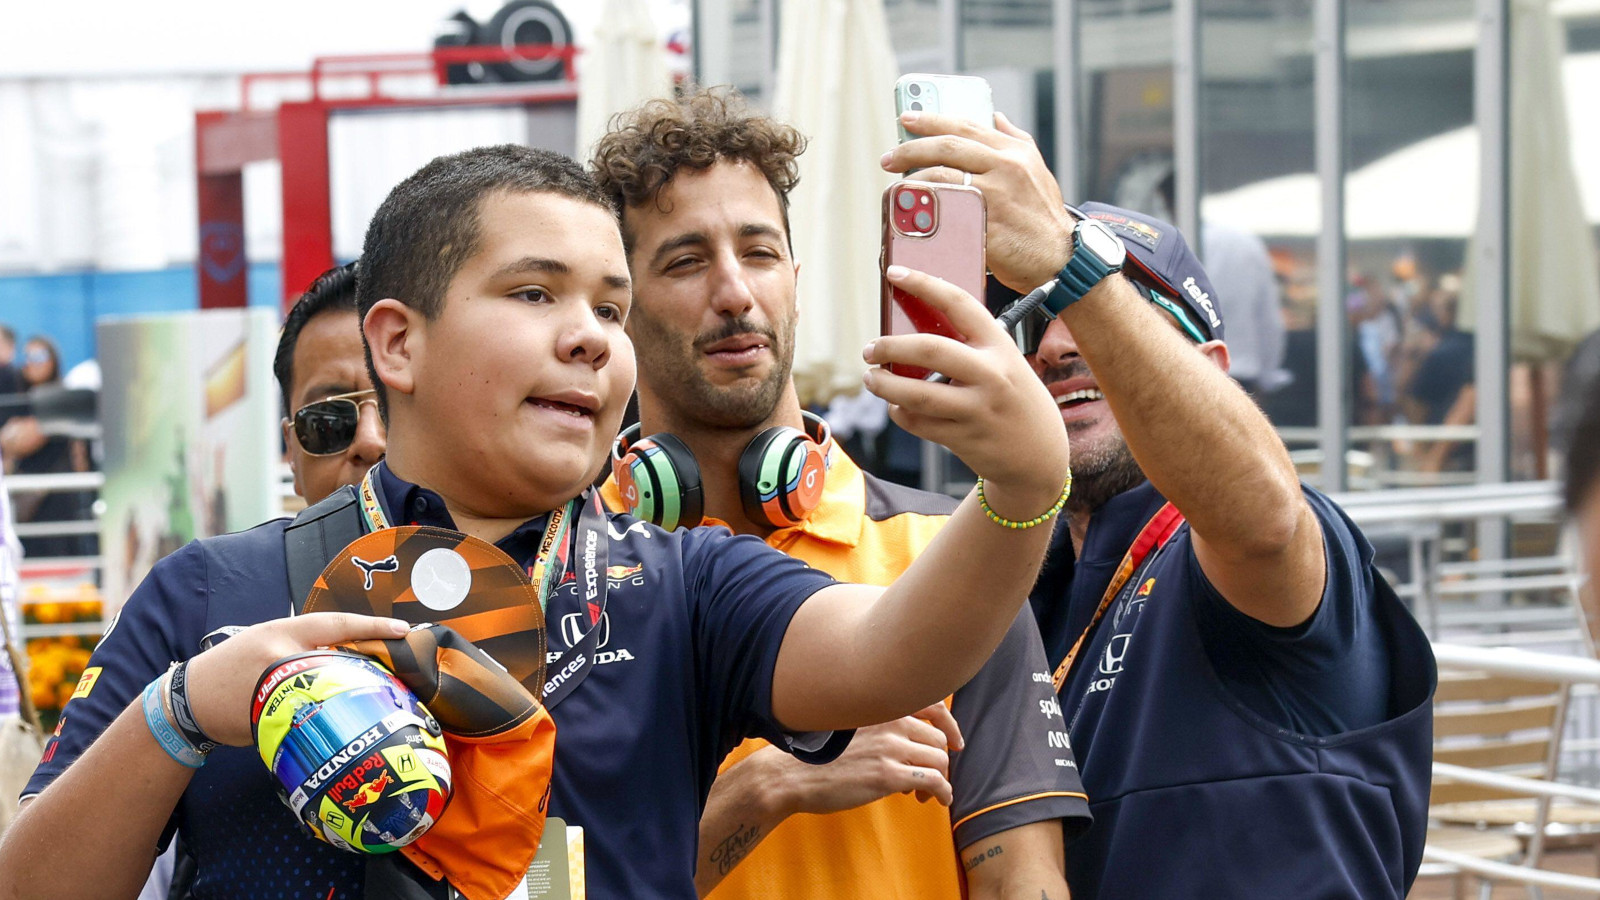 Fans take a photo with Daniel Ricciardo in the paddock. Mexico October 2022